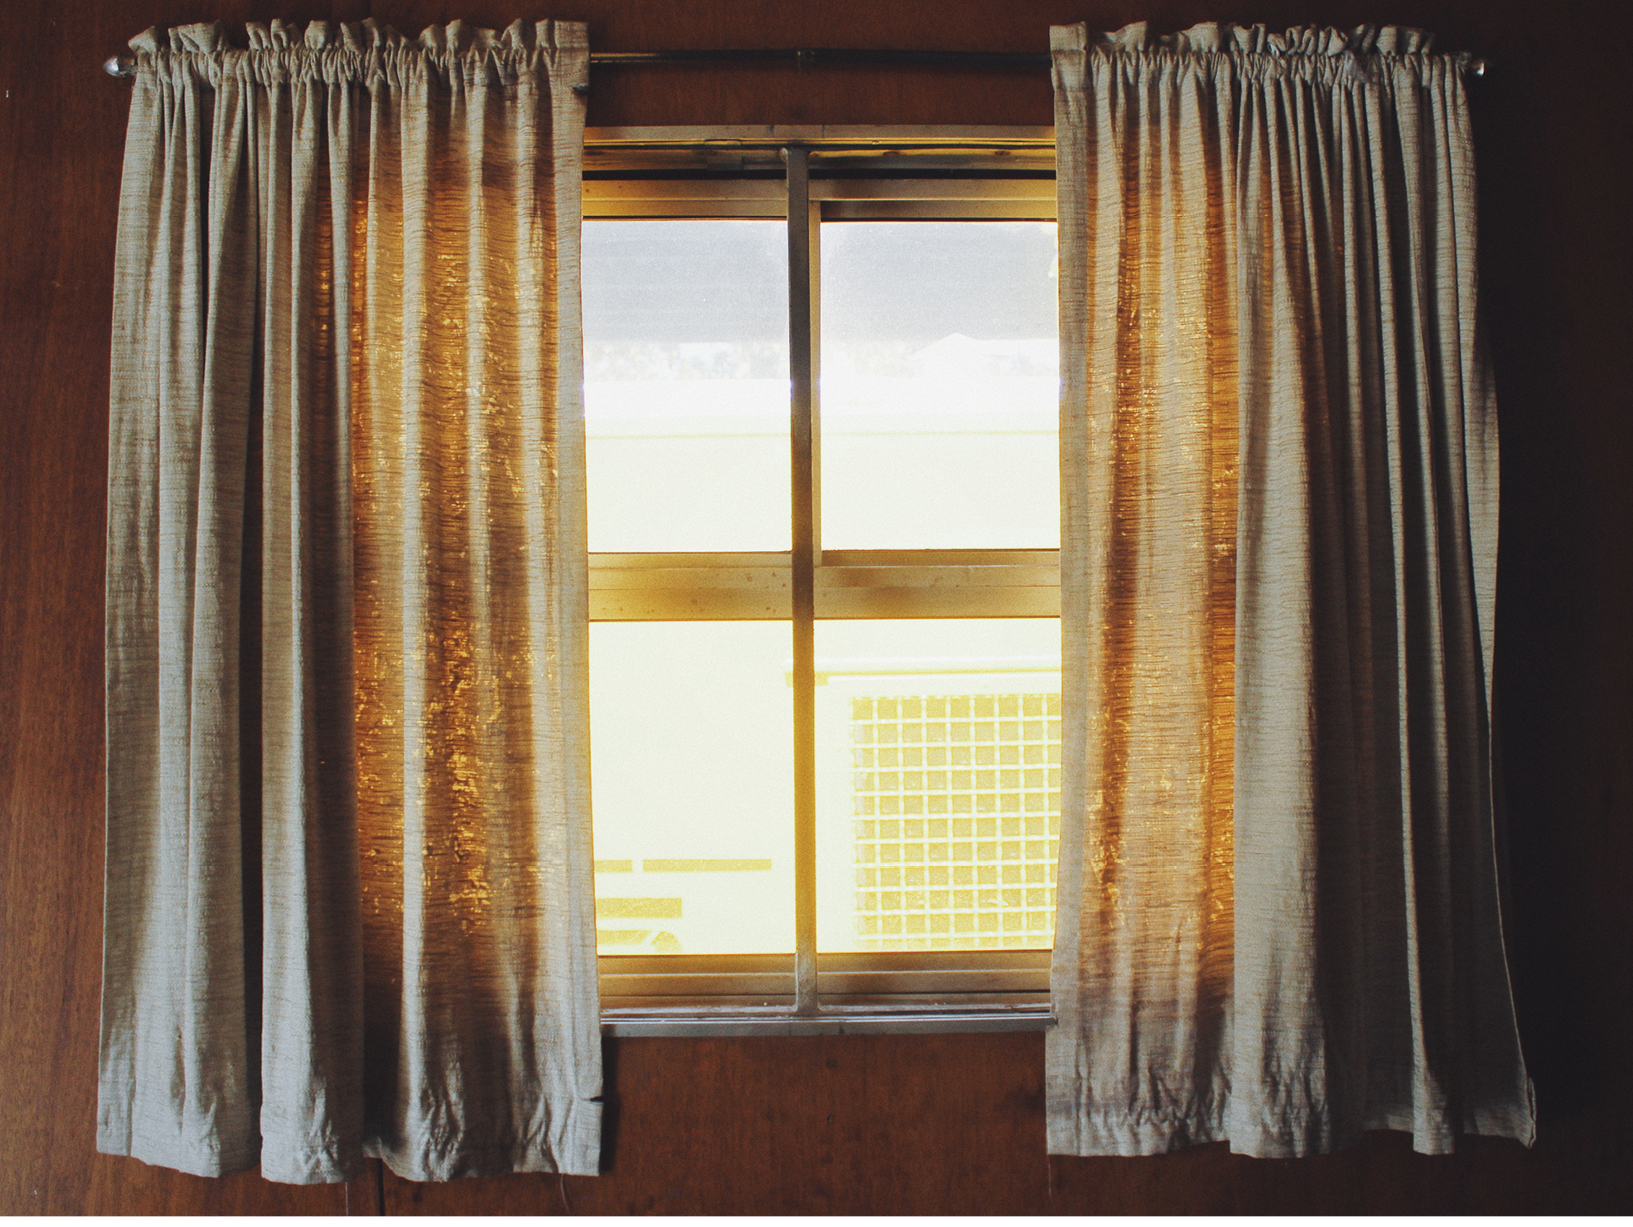 light coming through window with sheer curtains